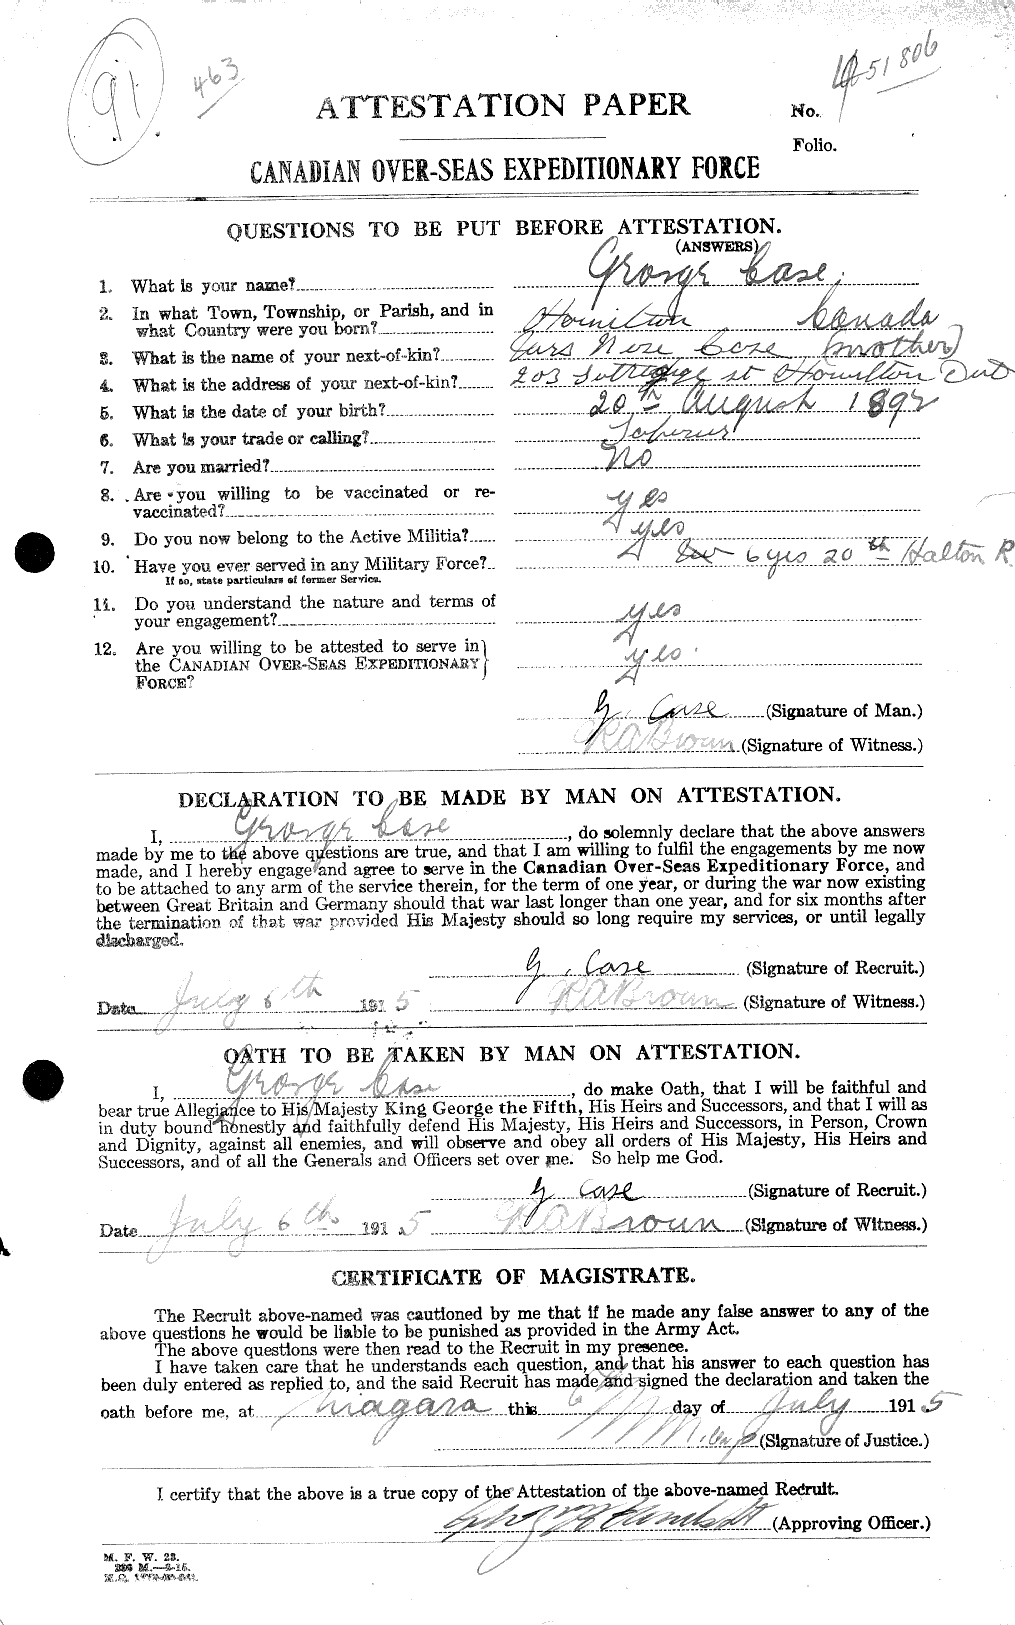 Personnel Records of the First World War - CEF 012702a